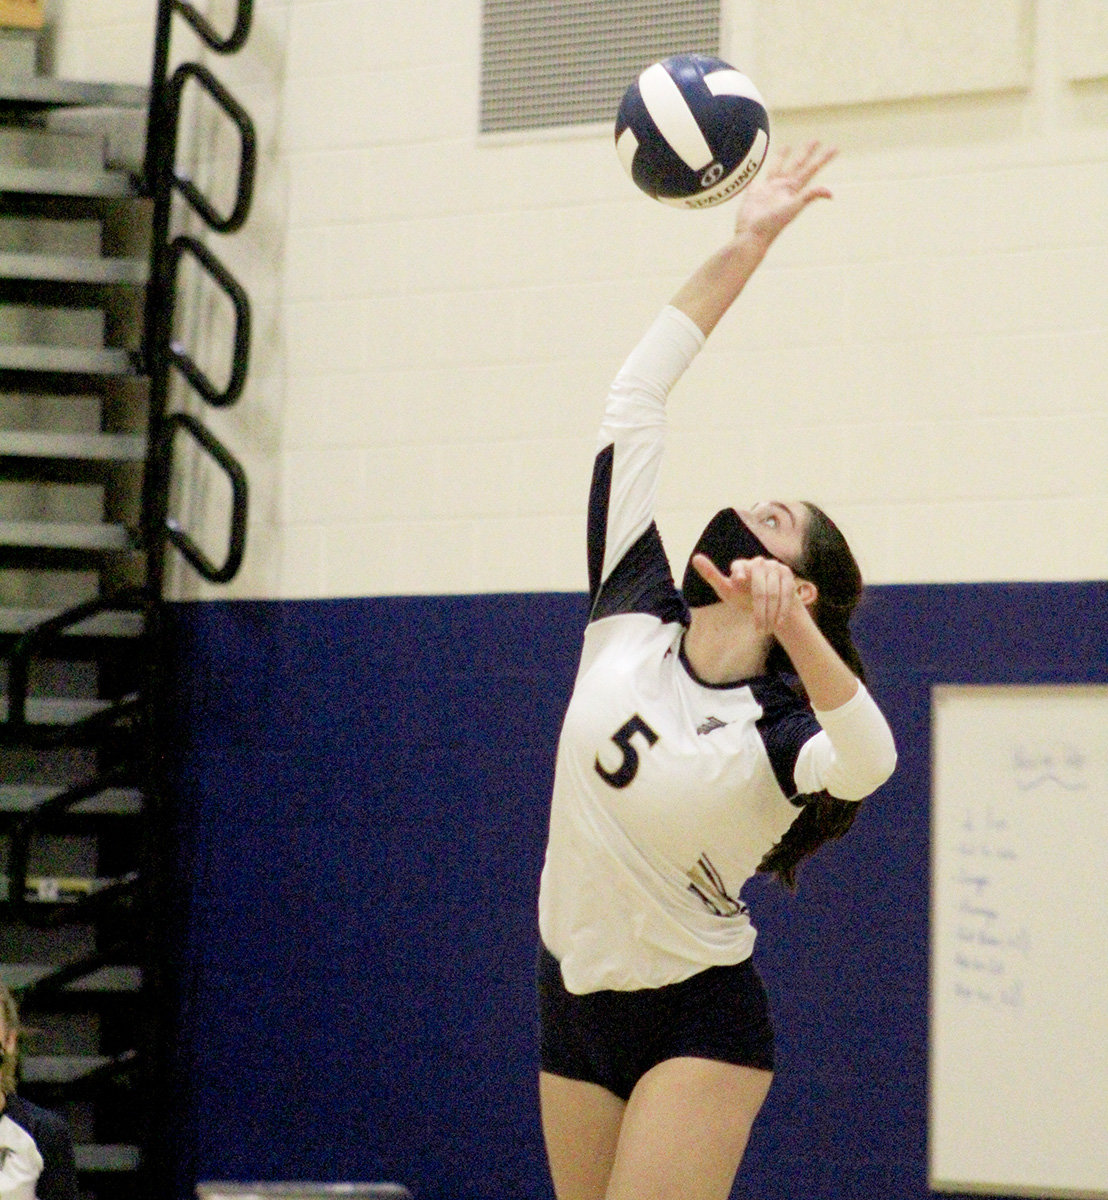 Siena DeCicco helped her team during a win over Broadneck on March 30.